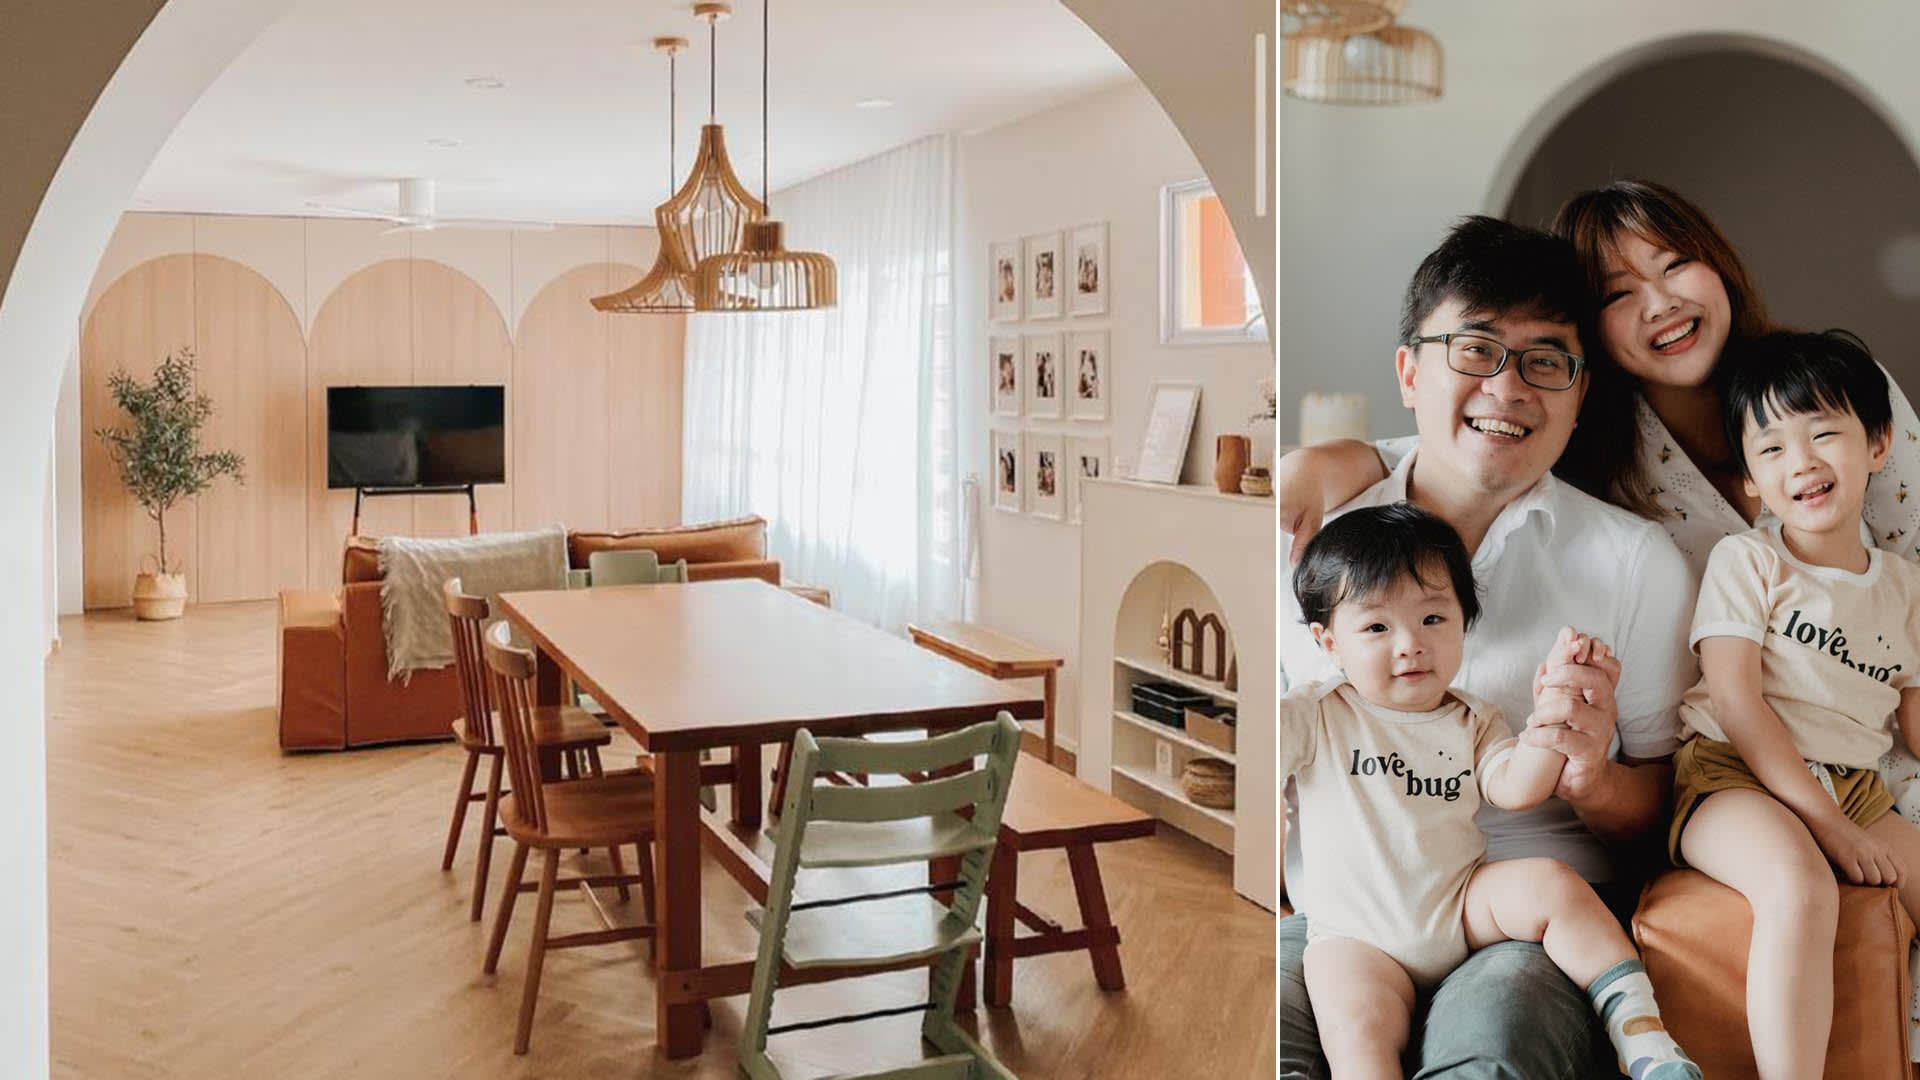 This Couple Designed Their 5-Room Resale Flat Themselves, Instead Of Hiring An Interior Designer. Here’s How They Handled The $80,000 Reno